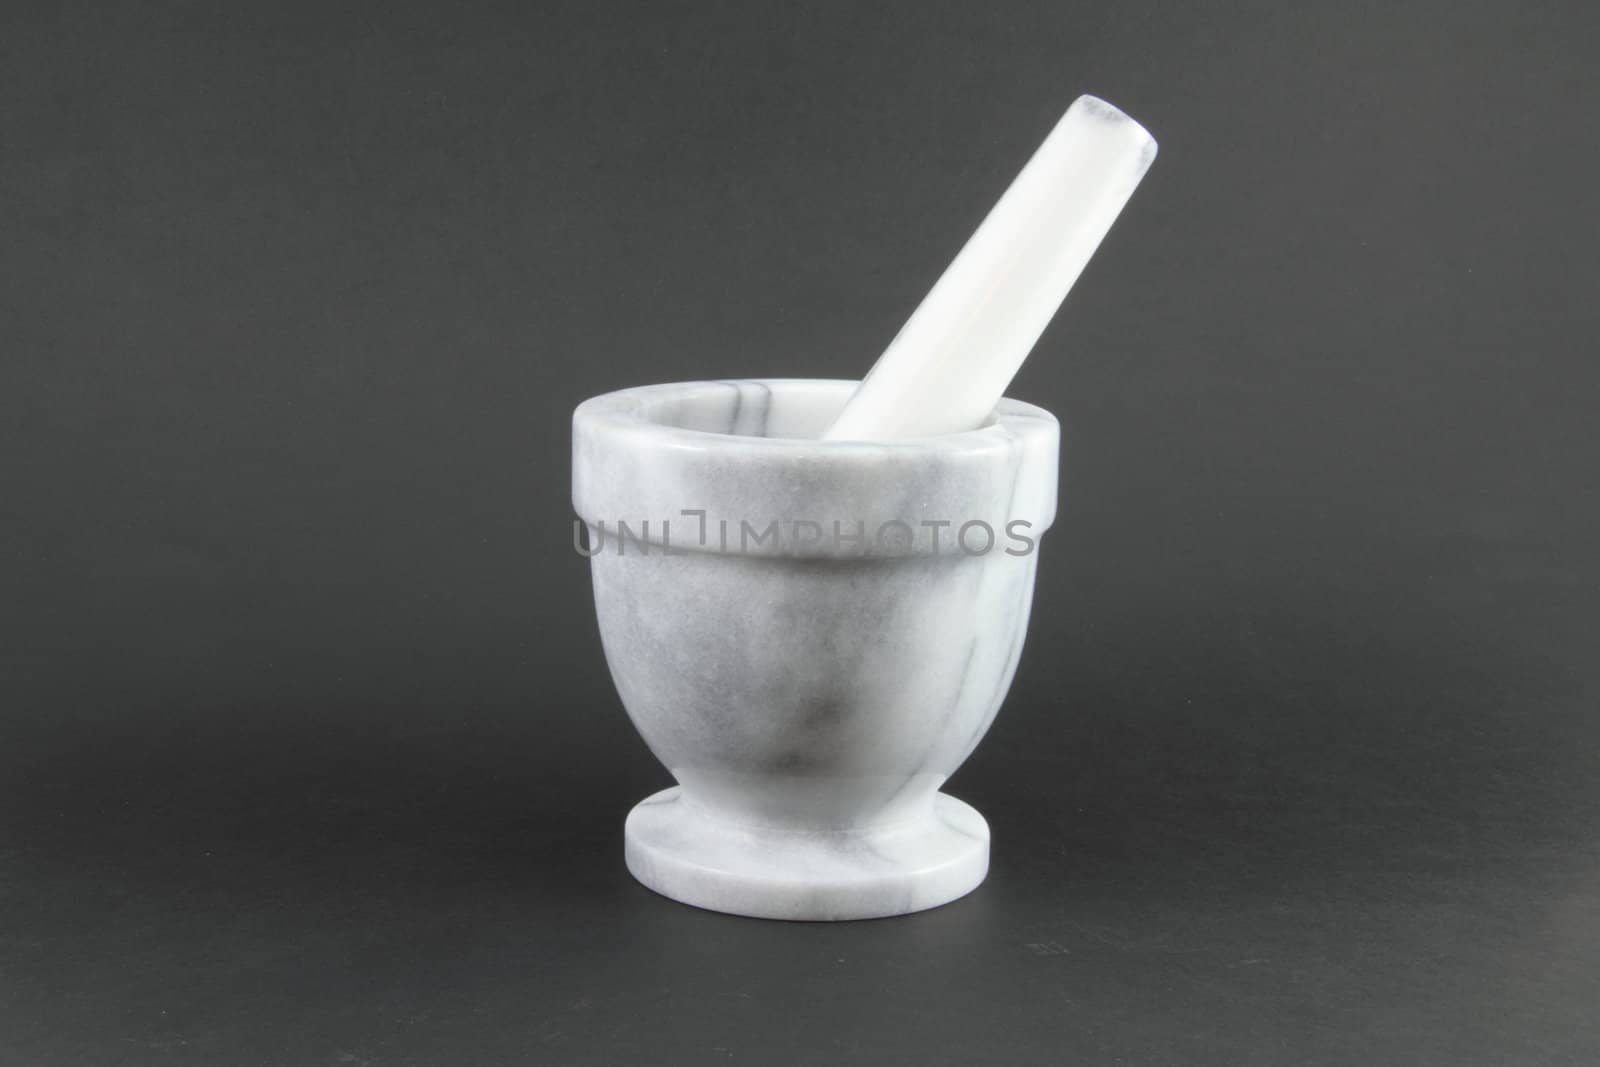 A pharmacist mortar and pestle on a grey background.